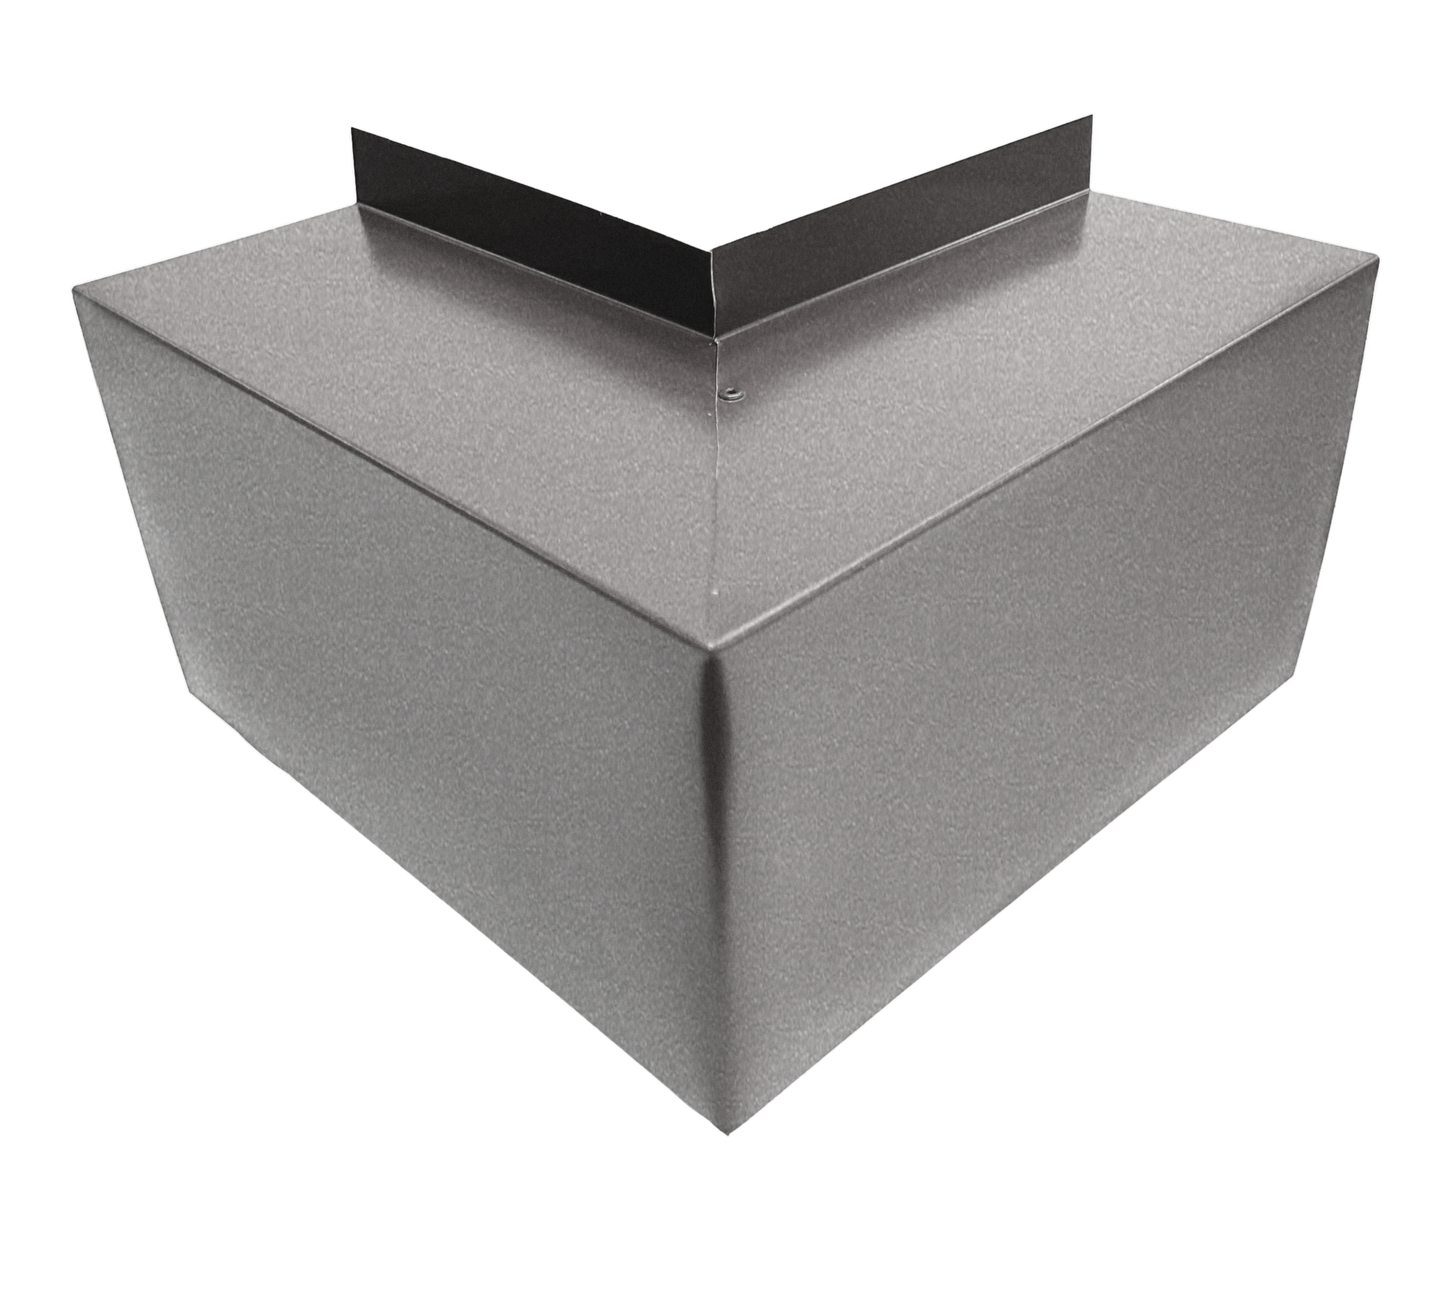 A gray metal box with a triangular, pointed base and a flat top, featuring a vertical seam along the middle. Made from durable 24 gauge steel elbows, the top edges have additional angled metal flaps extending upwards for easy installation. The background is white. This is the Perma Cover Commercial Series - 24 Gauge Line Set Cover Outside Corner Elbows - Premium Quality.